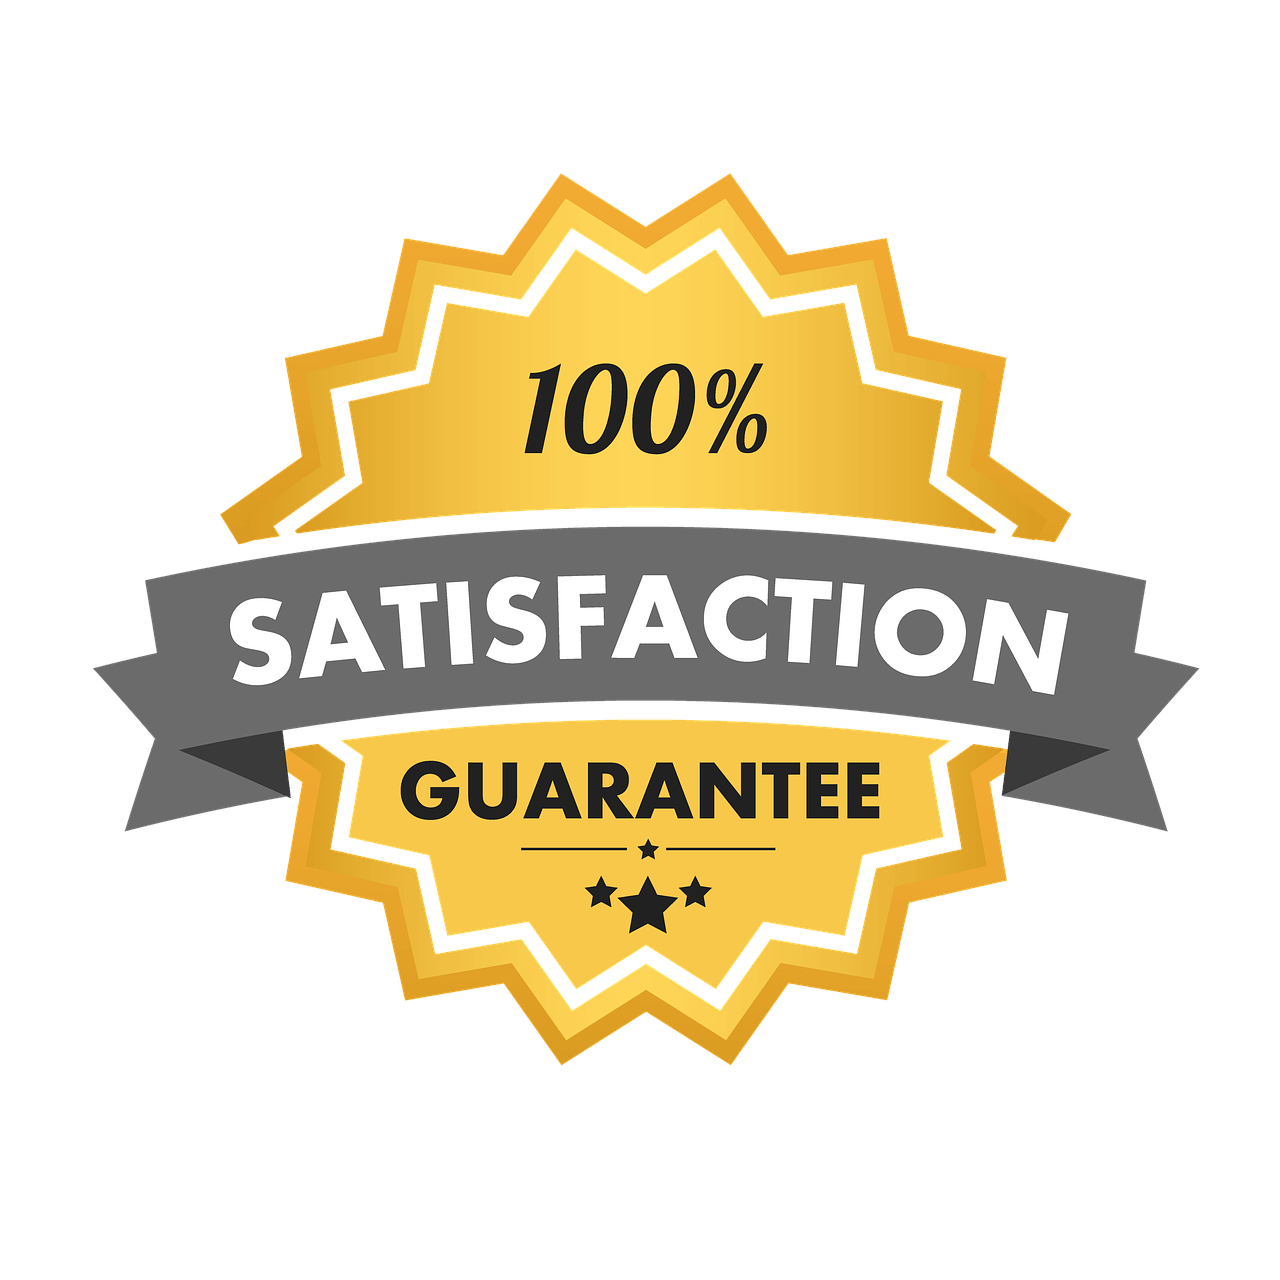 Offer your customers a guarantee.